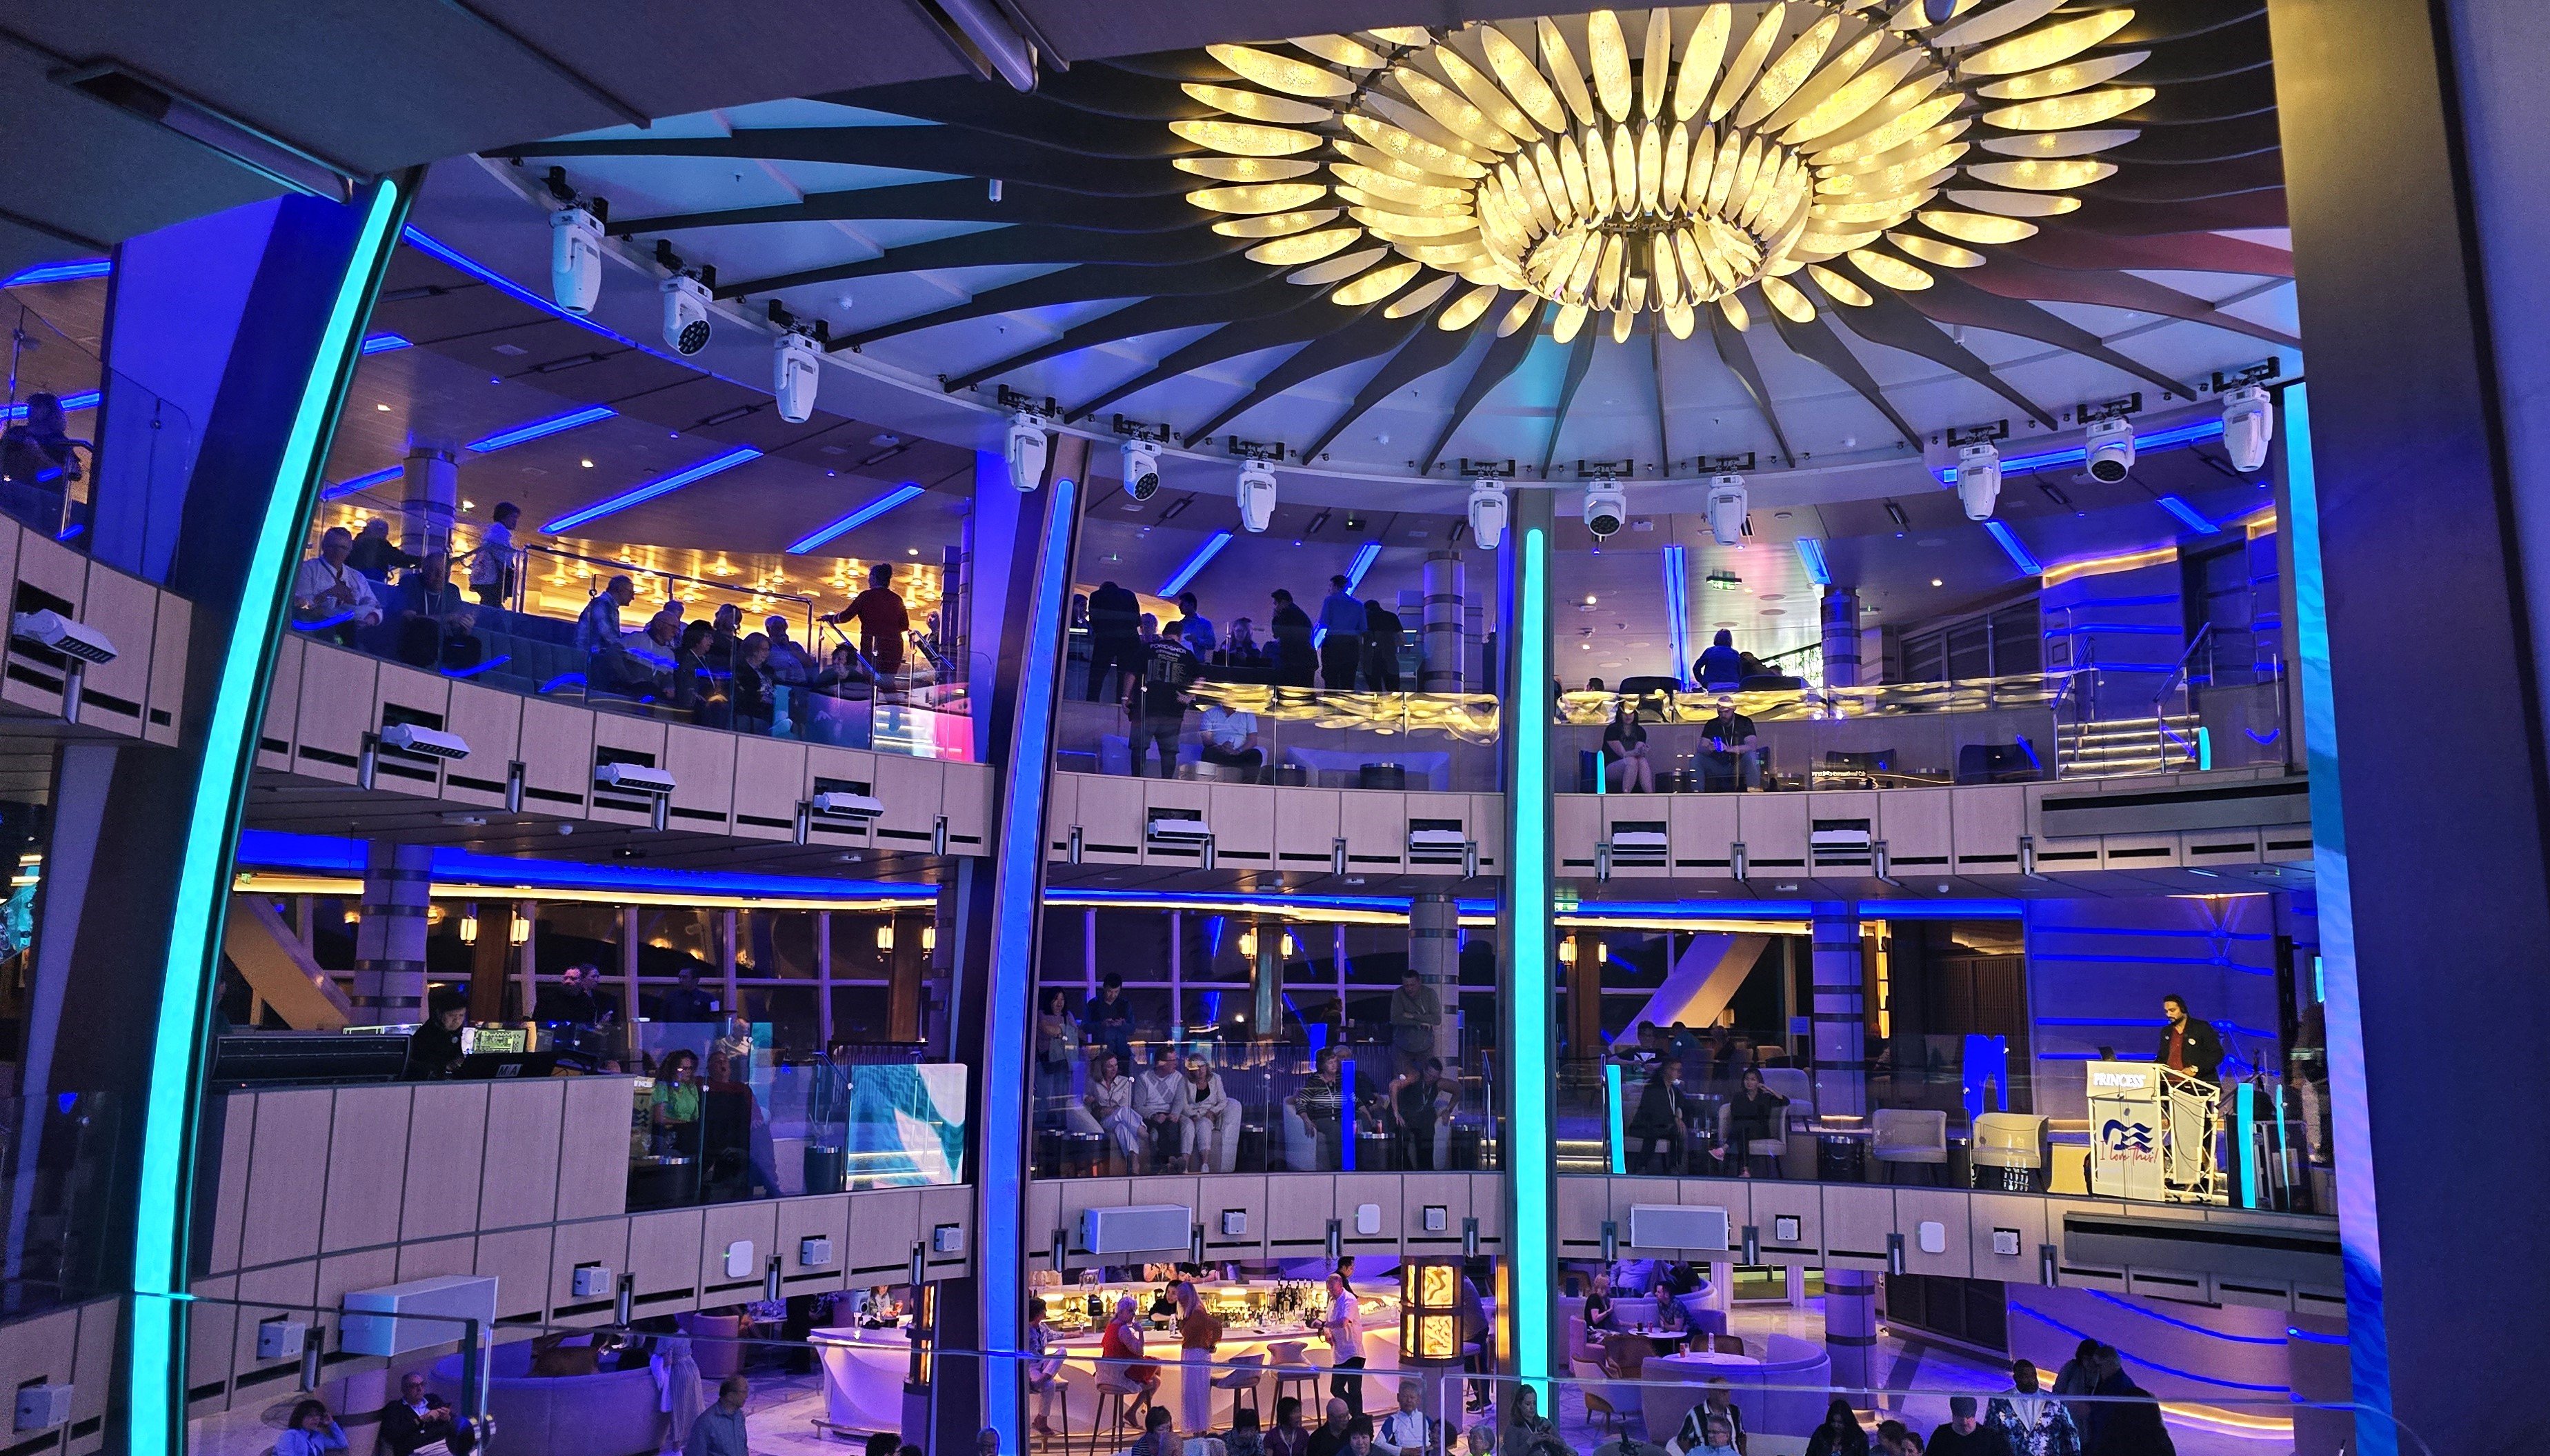 Sun Princess Piazza is on multiple levels with seating bars eateries and live entertainment below on Deck 7 Photo by Susa